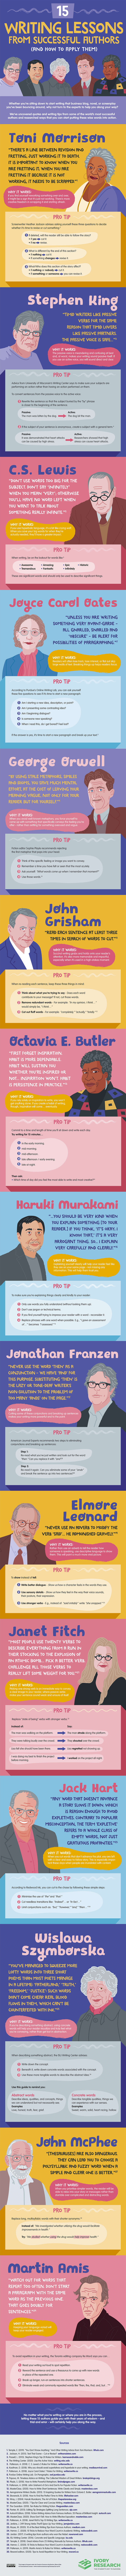 how to improve your website copy 15 lessons from successful writers infographic